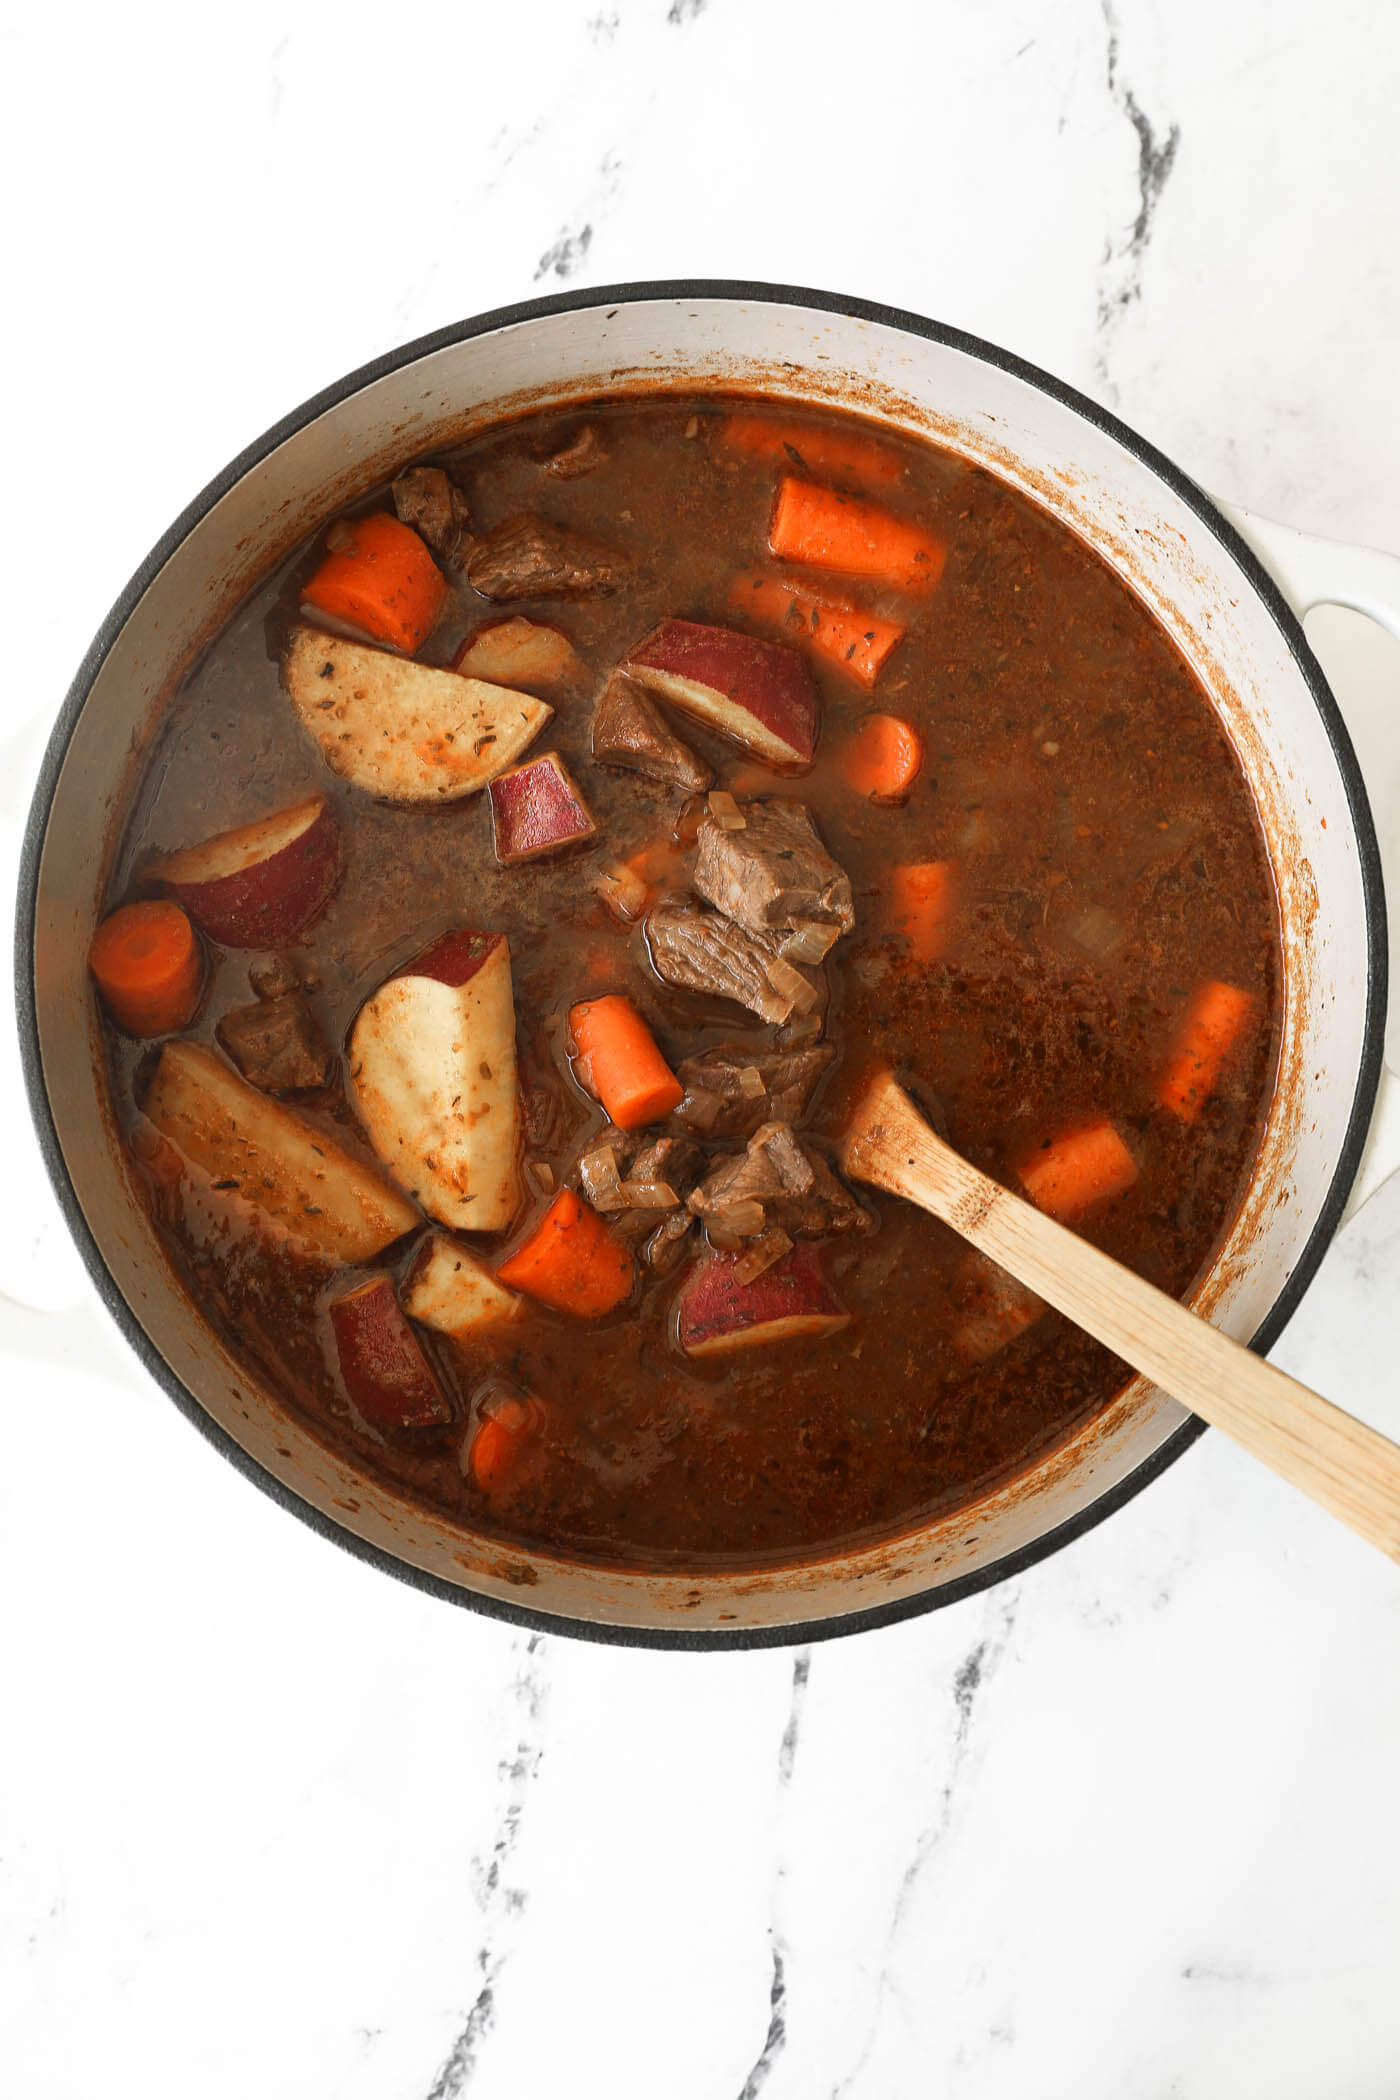 https://realsimplegood.com/wp-content/uploads/Classic-Old-Fashioned-Dutch-Oven-Beef-Stew-15.jpg